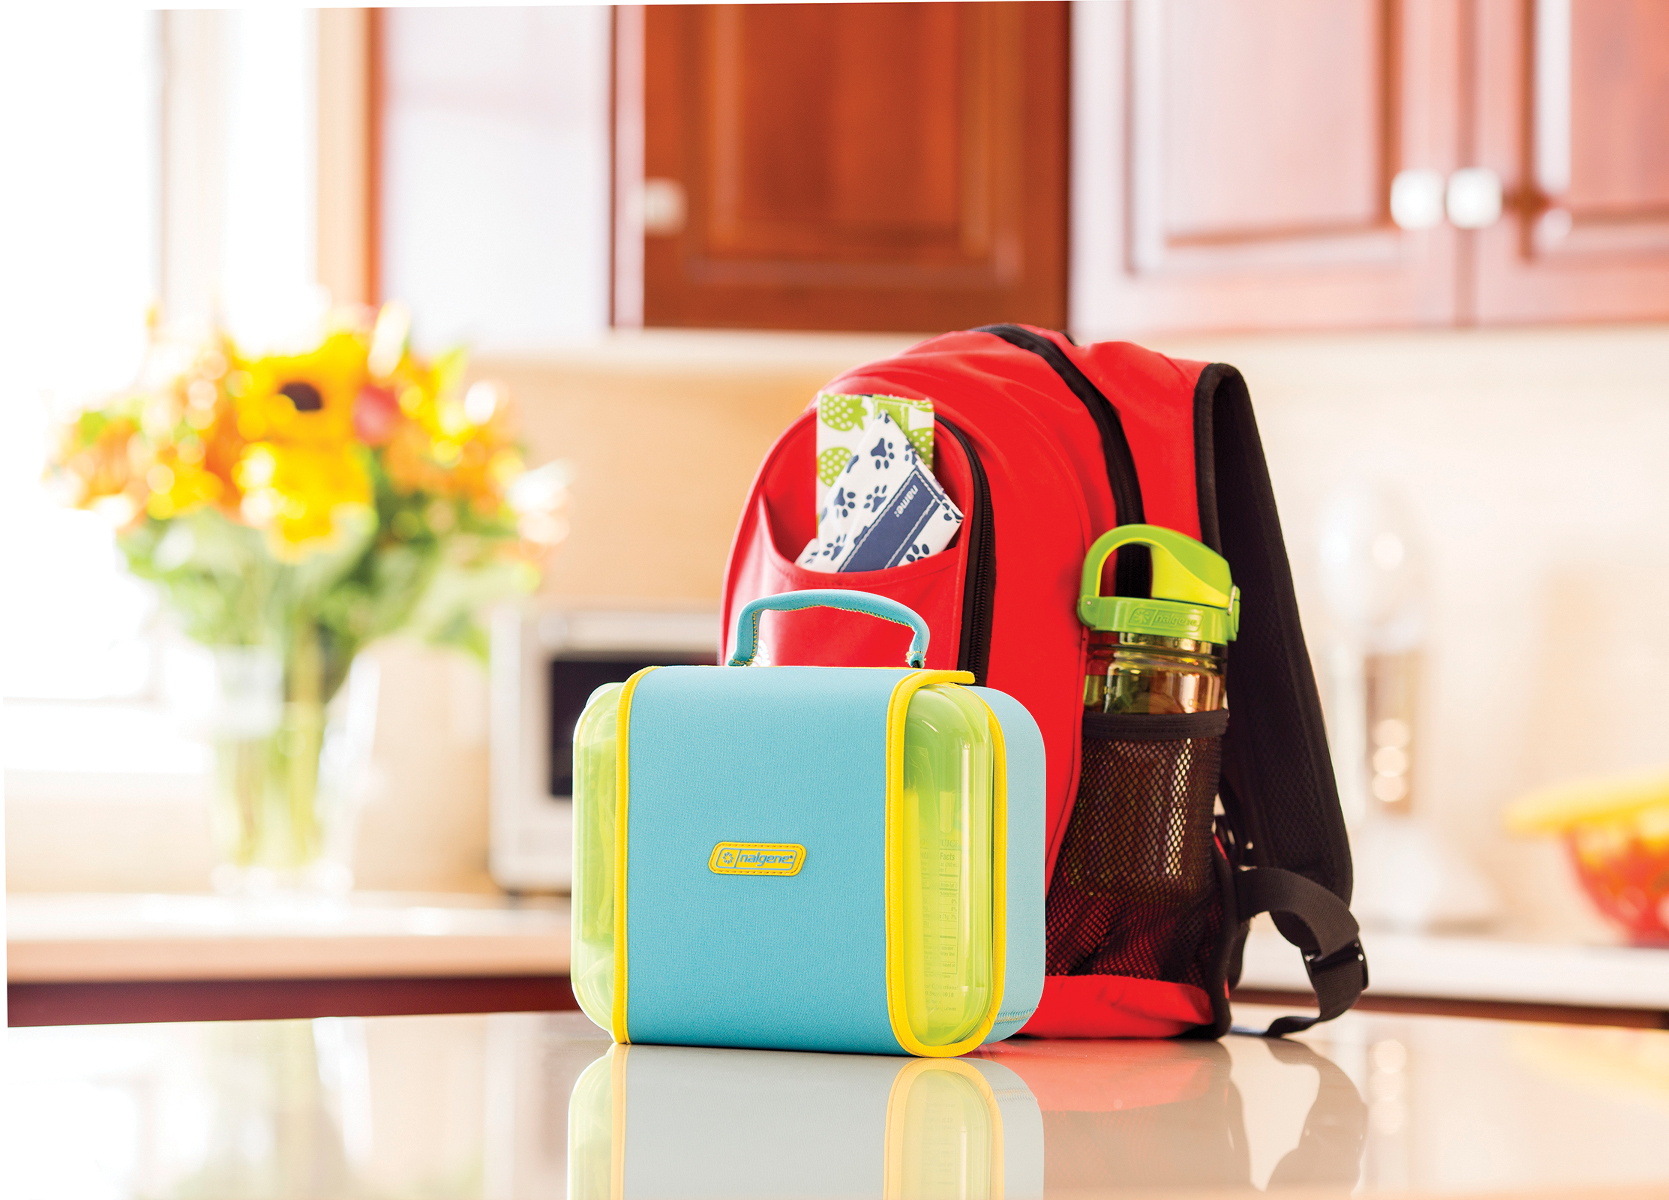 5 easy ways families can go green when packing school lunches